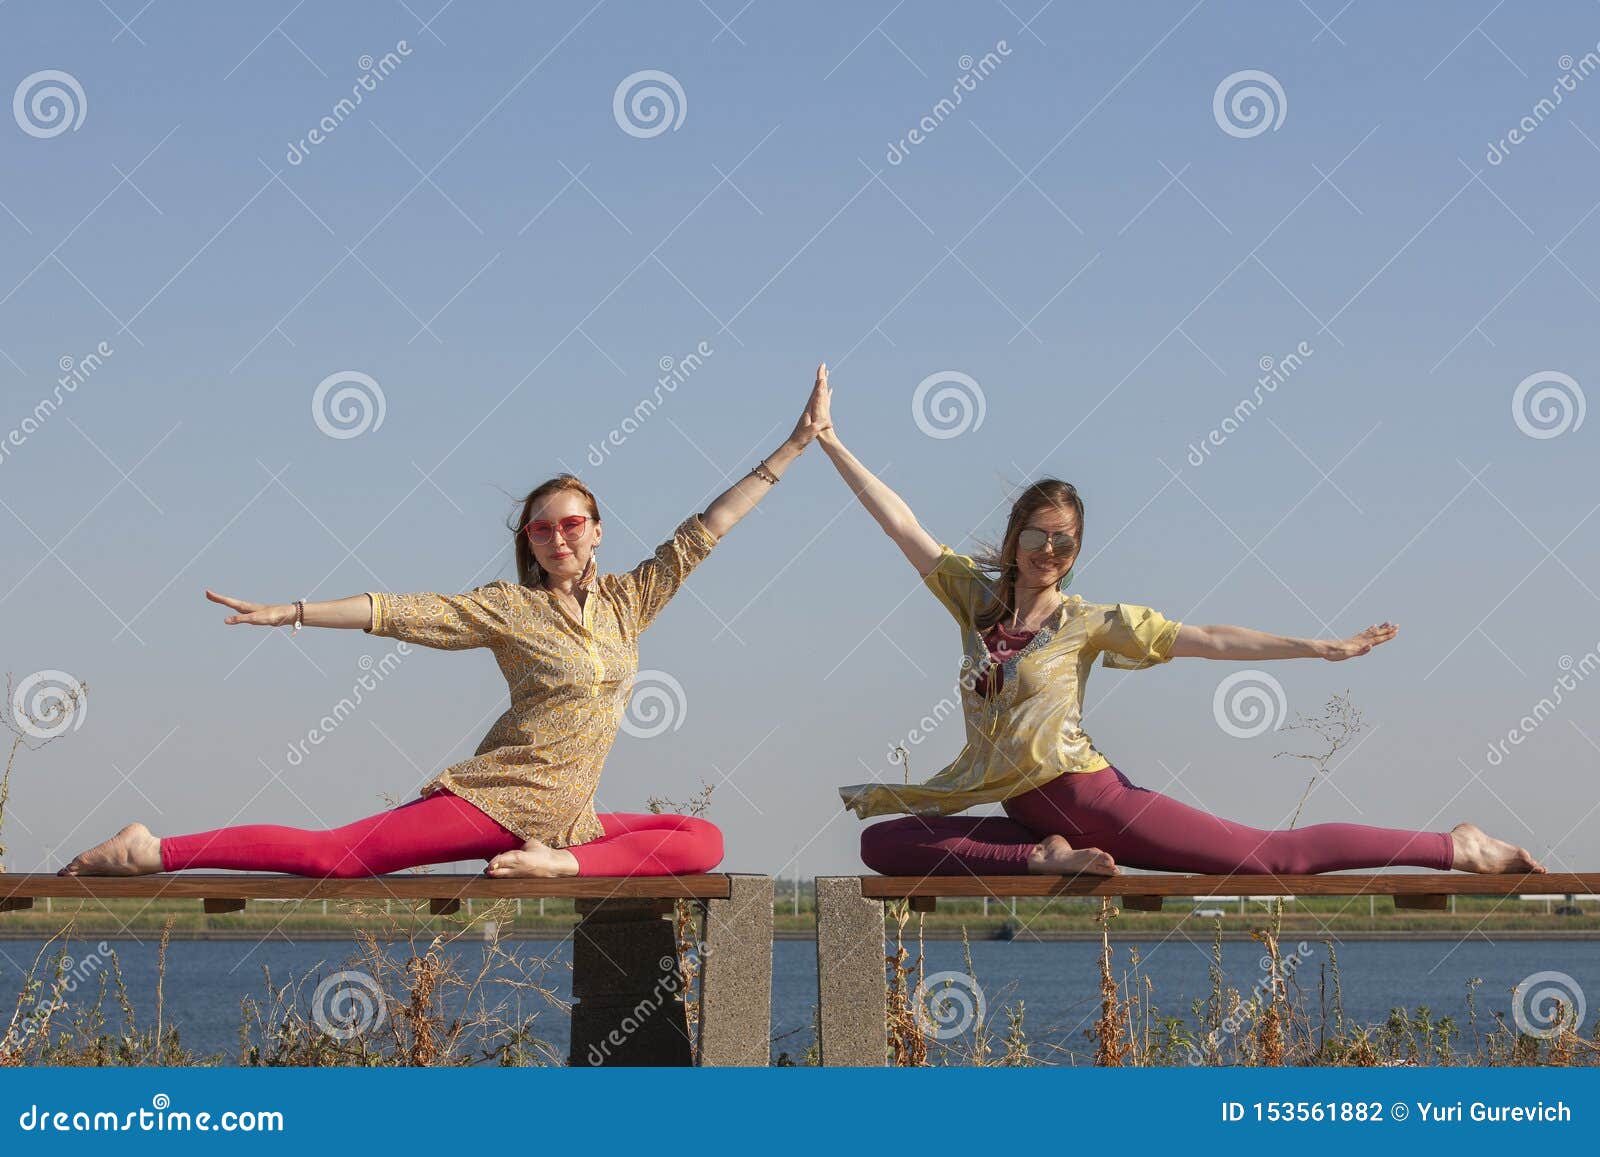 Yo Middle aged woman doing yoga early in the morning in a park royalty free  stock images